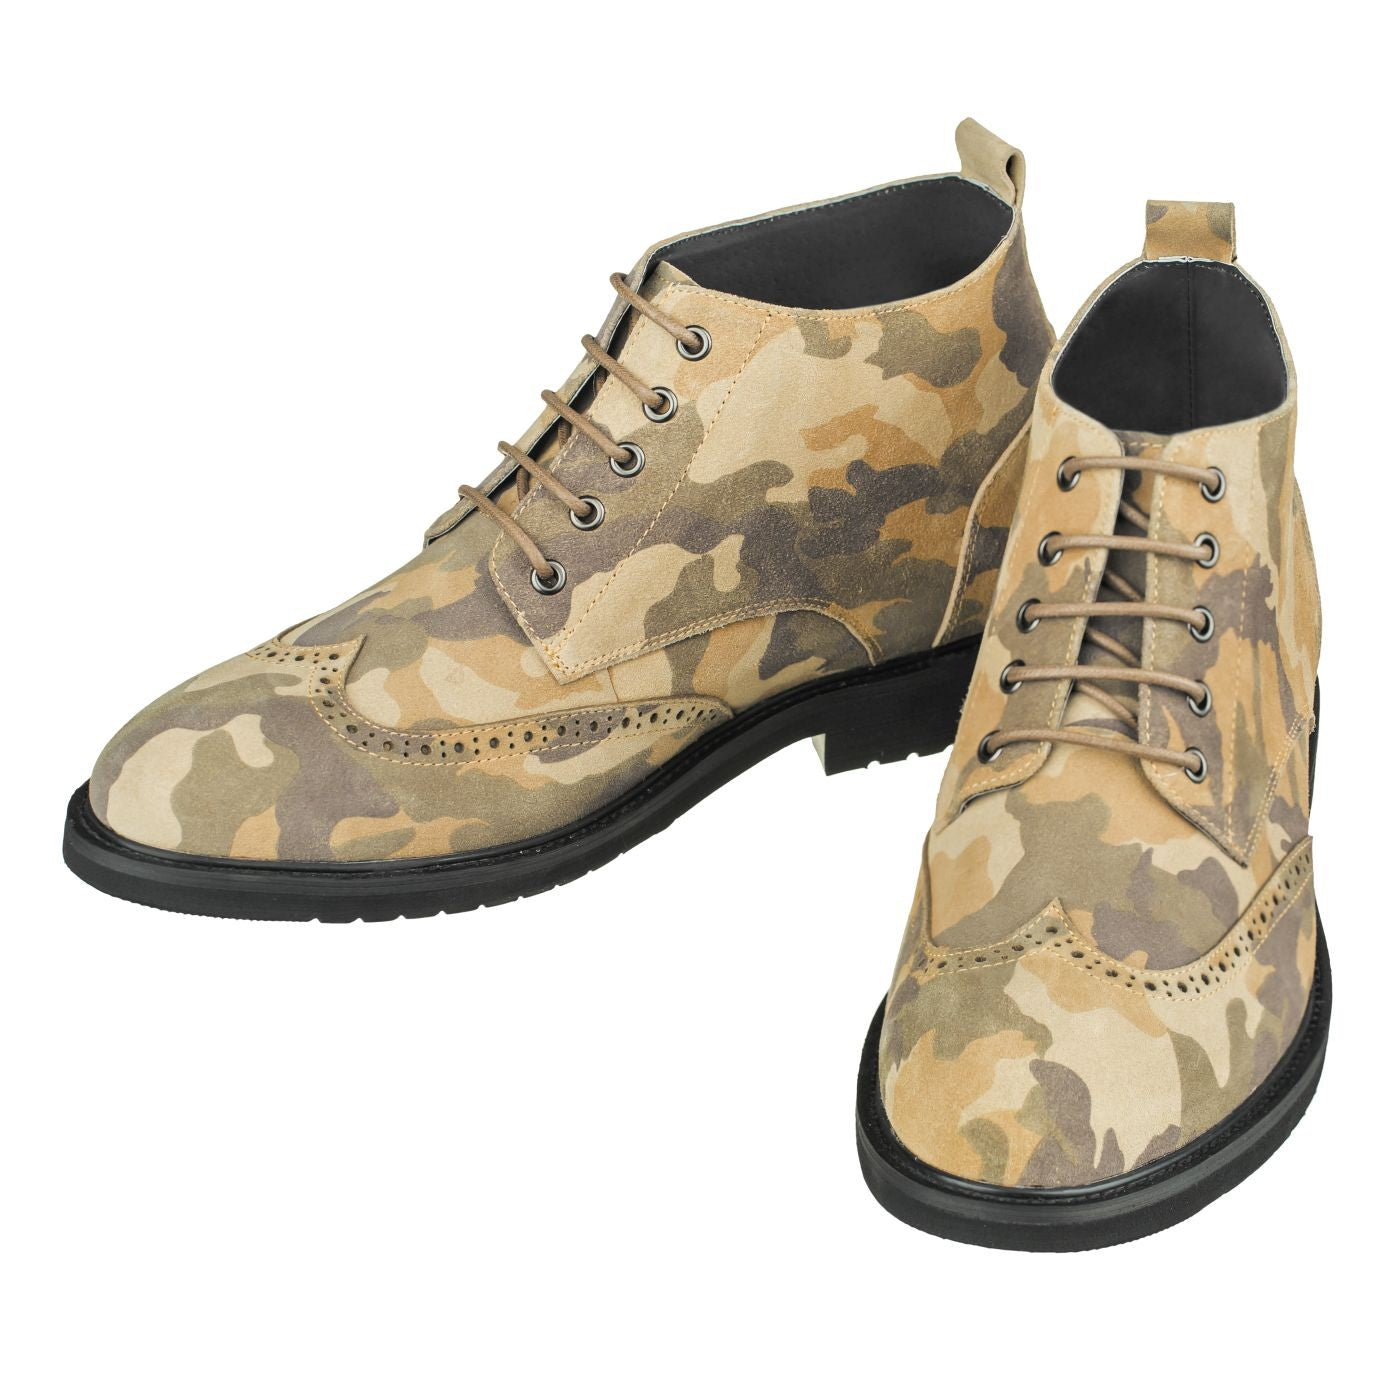 Elevator shoes height increase CALTO - S3650 - 3.0 Inches Taller (Camo Brown) - Lightweight